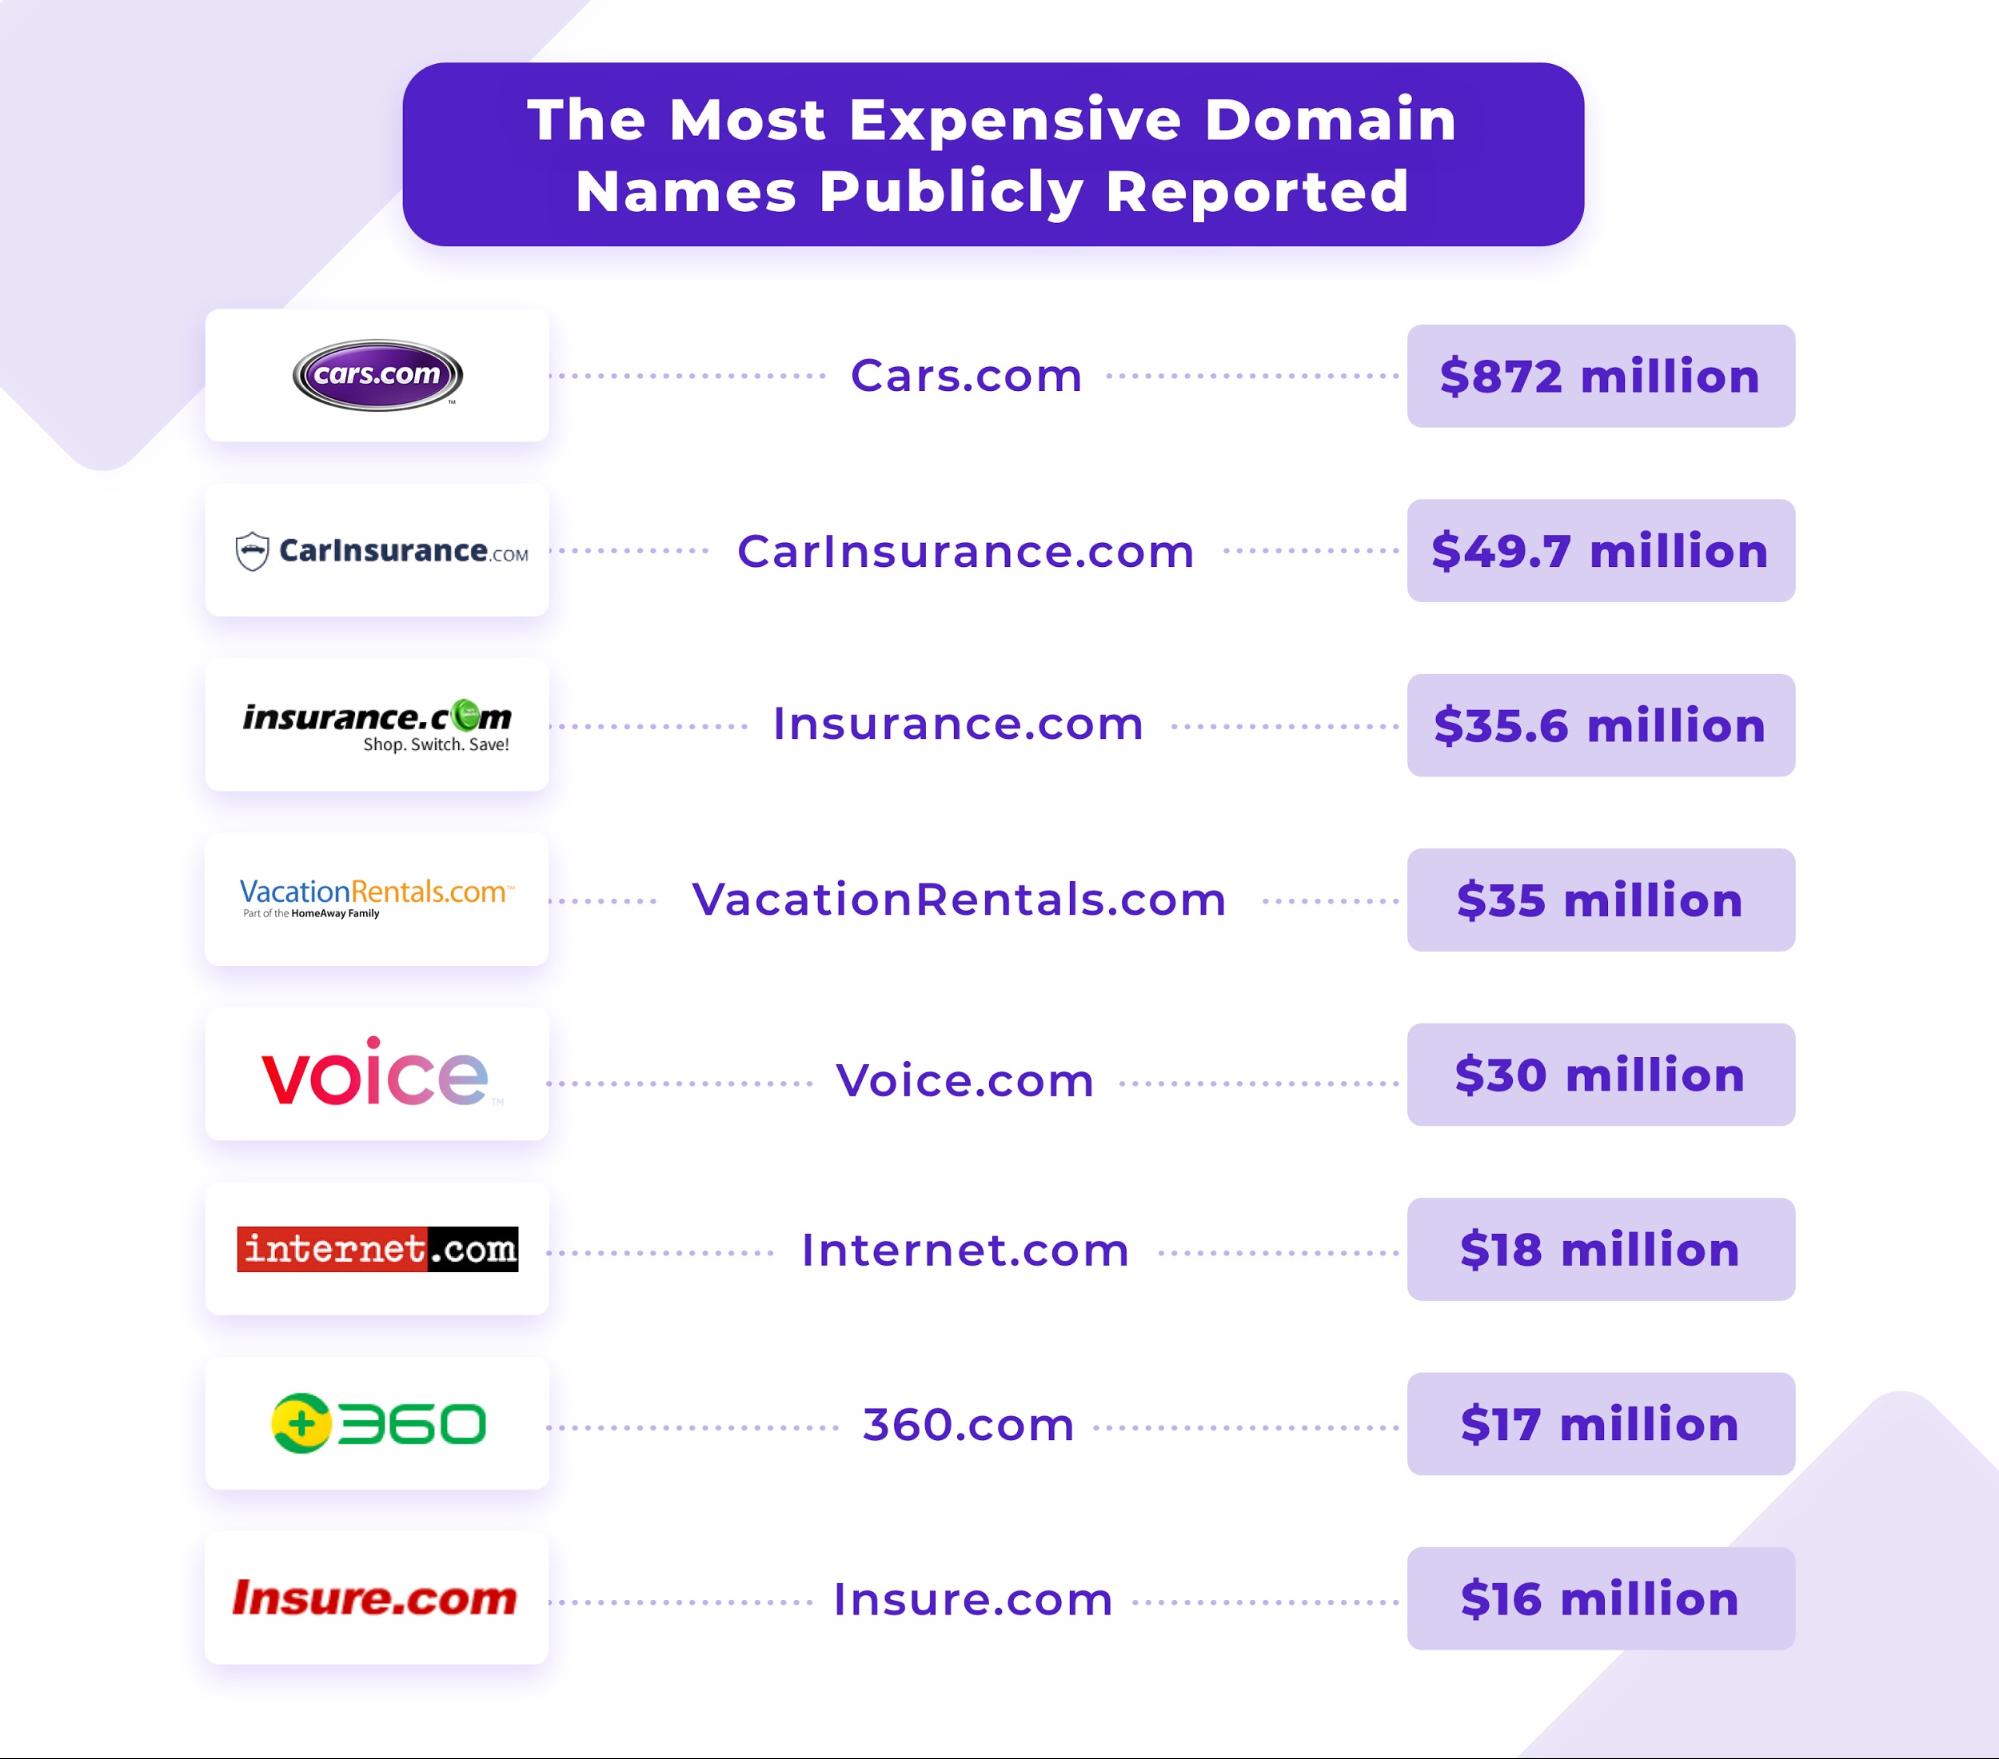 The Ultimate Guide to Choosing and Buying a Domain Name